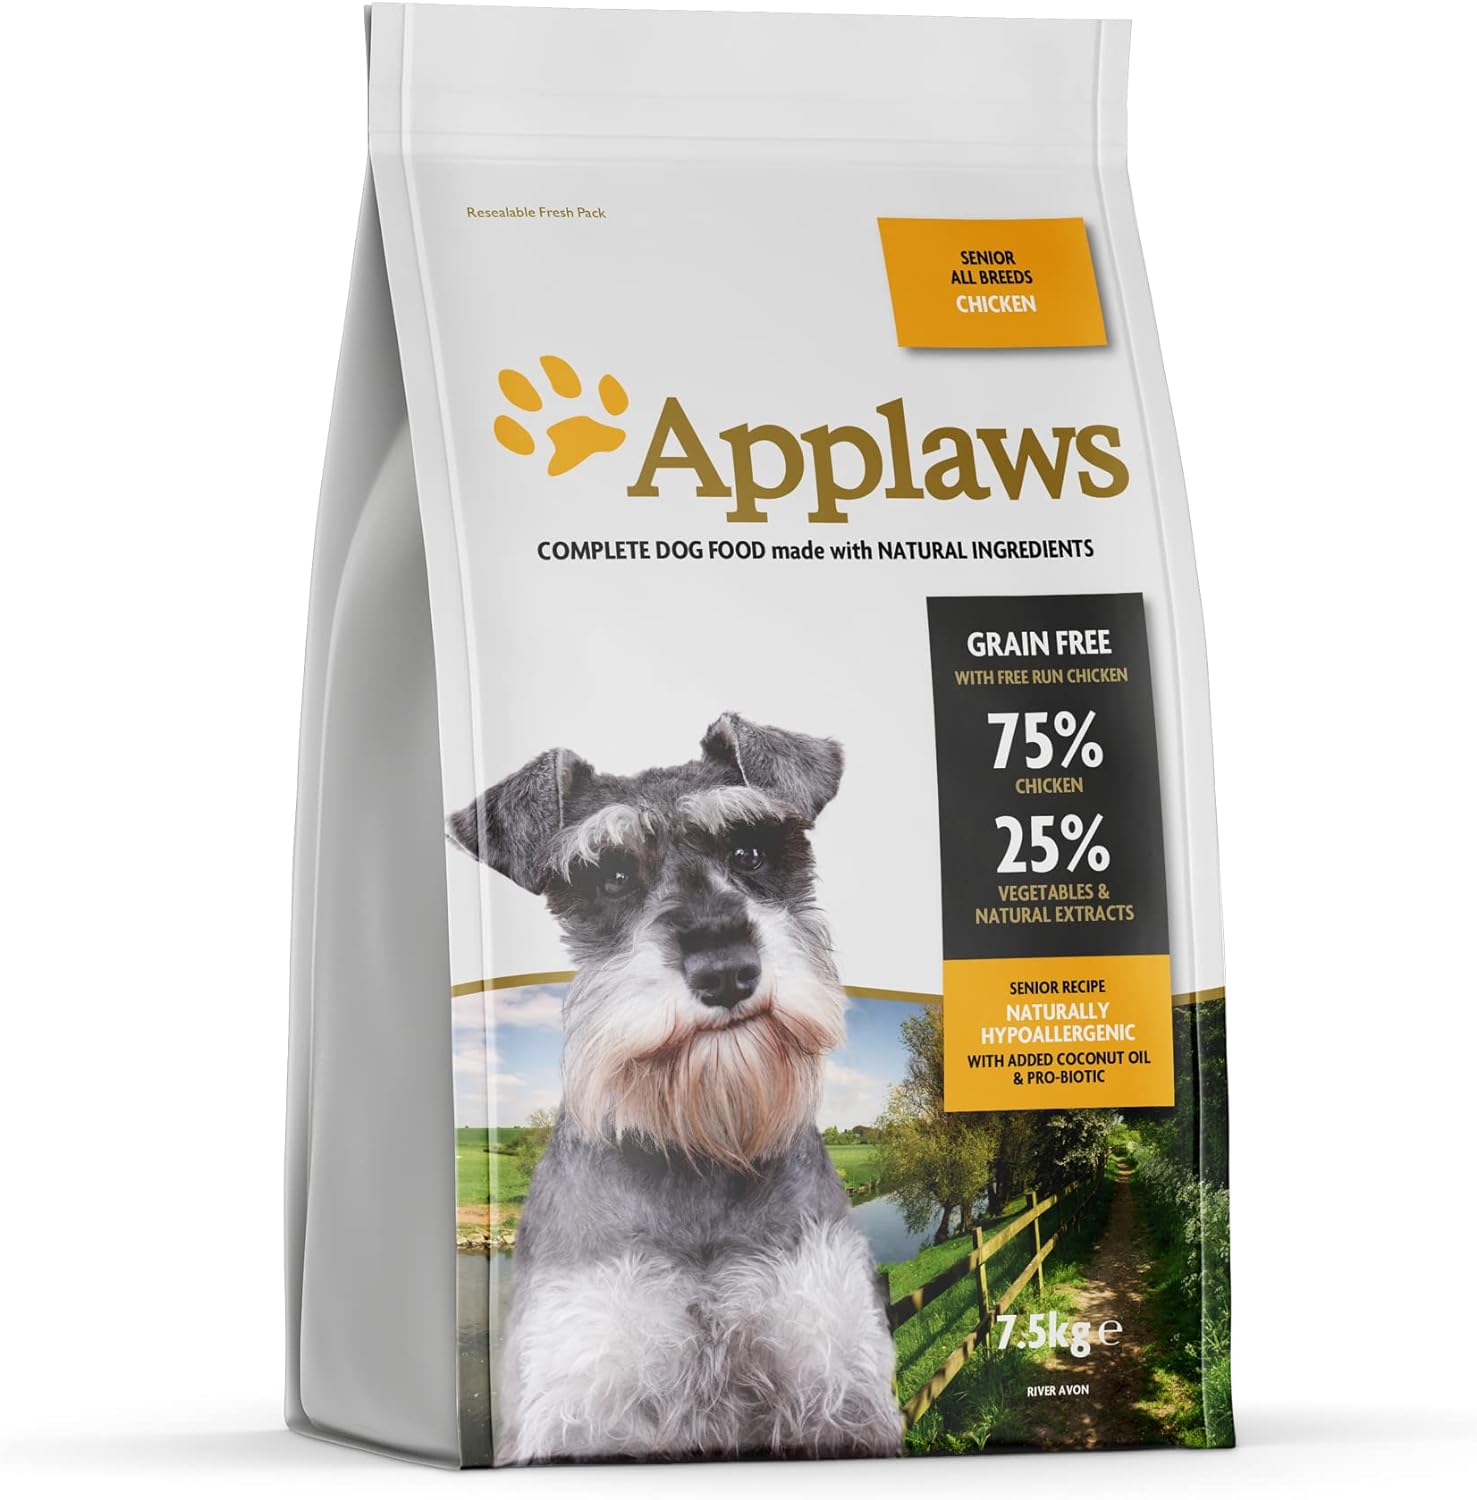 Applaws Natural Grain Free Complete Dry Dog Food for All Senior Breeds Chicken Flavour, 1 x 7.5kg Bag?9102285